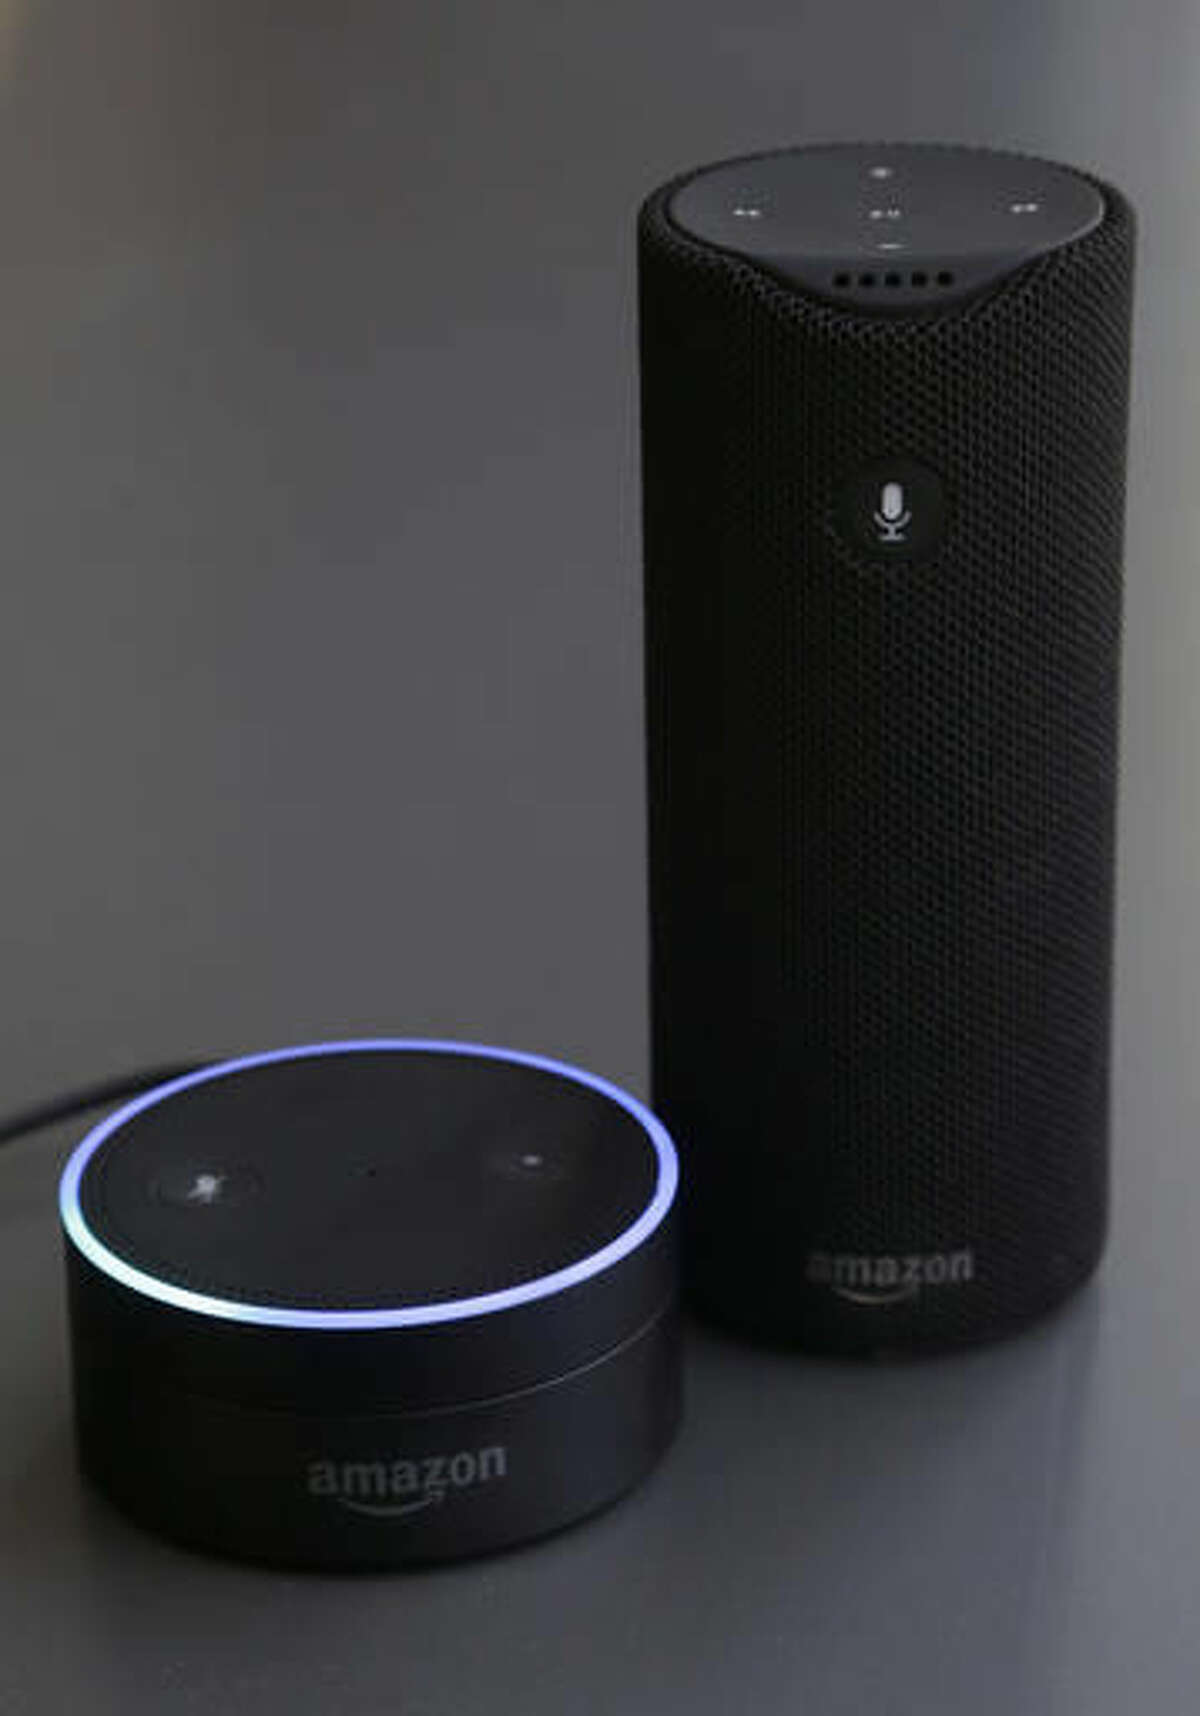 FILE - This Wednesday, March 2, 2016, file photo shows an Echo Dot, left, and an Amazon Tap in San Francisco. The Amazon Echo, which listens to you, answers questions and carries out tasks like calling an Uber or turning on your lights, is finding a place in millions of living rooms. The Dot and the portable Tap give the Echo's Alexa software even broader reach. (AP Photo/Jeff Chiu, File)